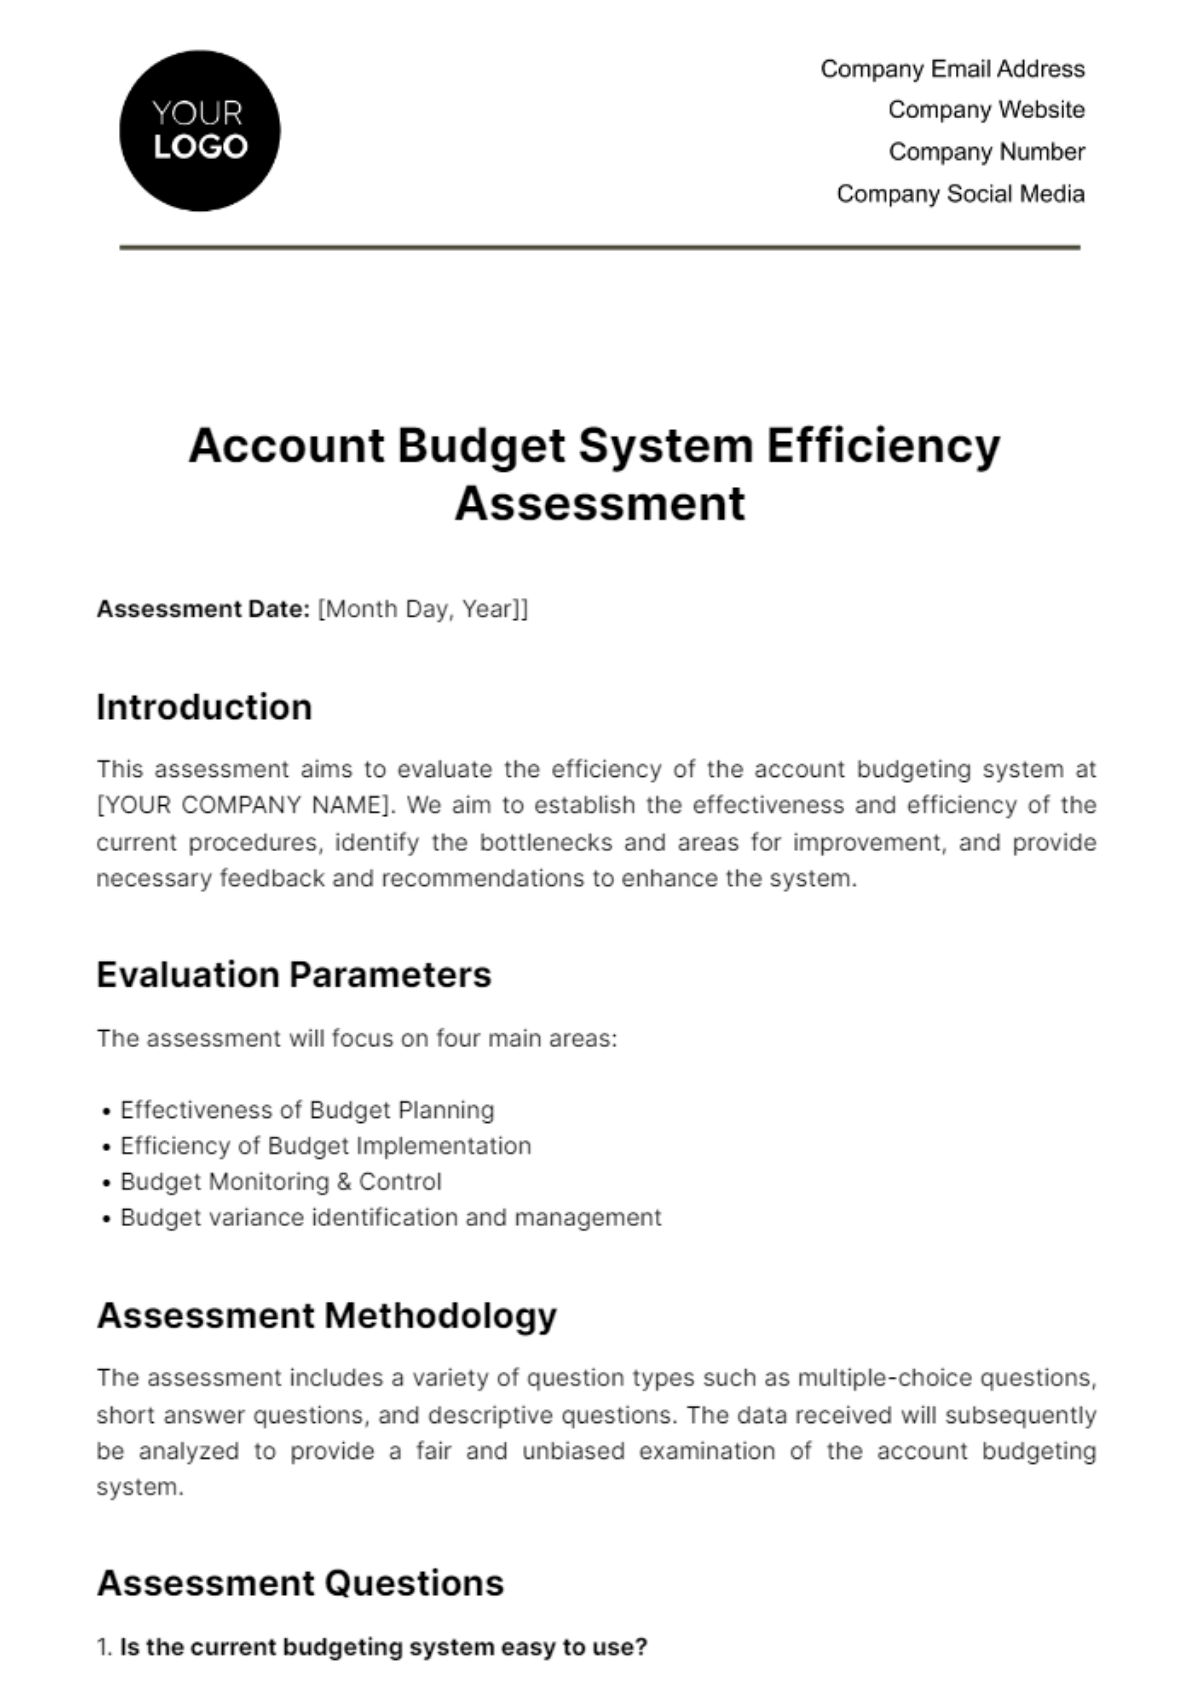 Free Account Budget System Efficiency Assessment Template